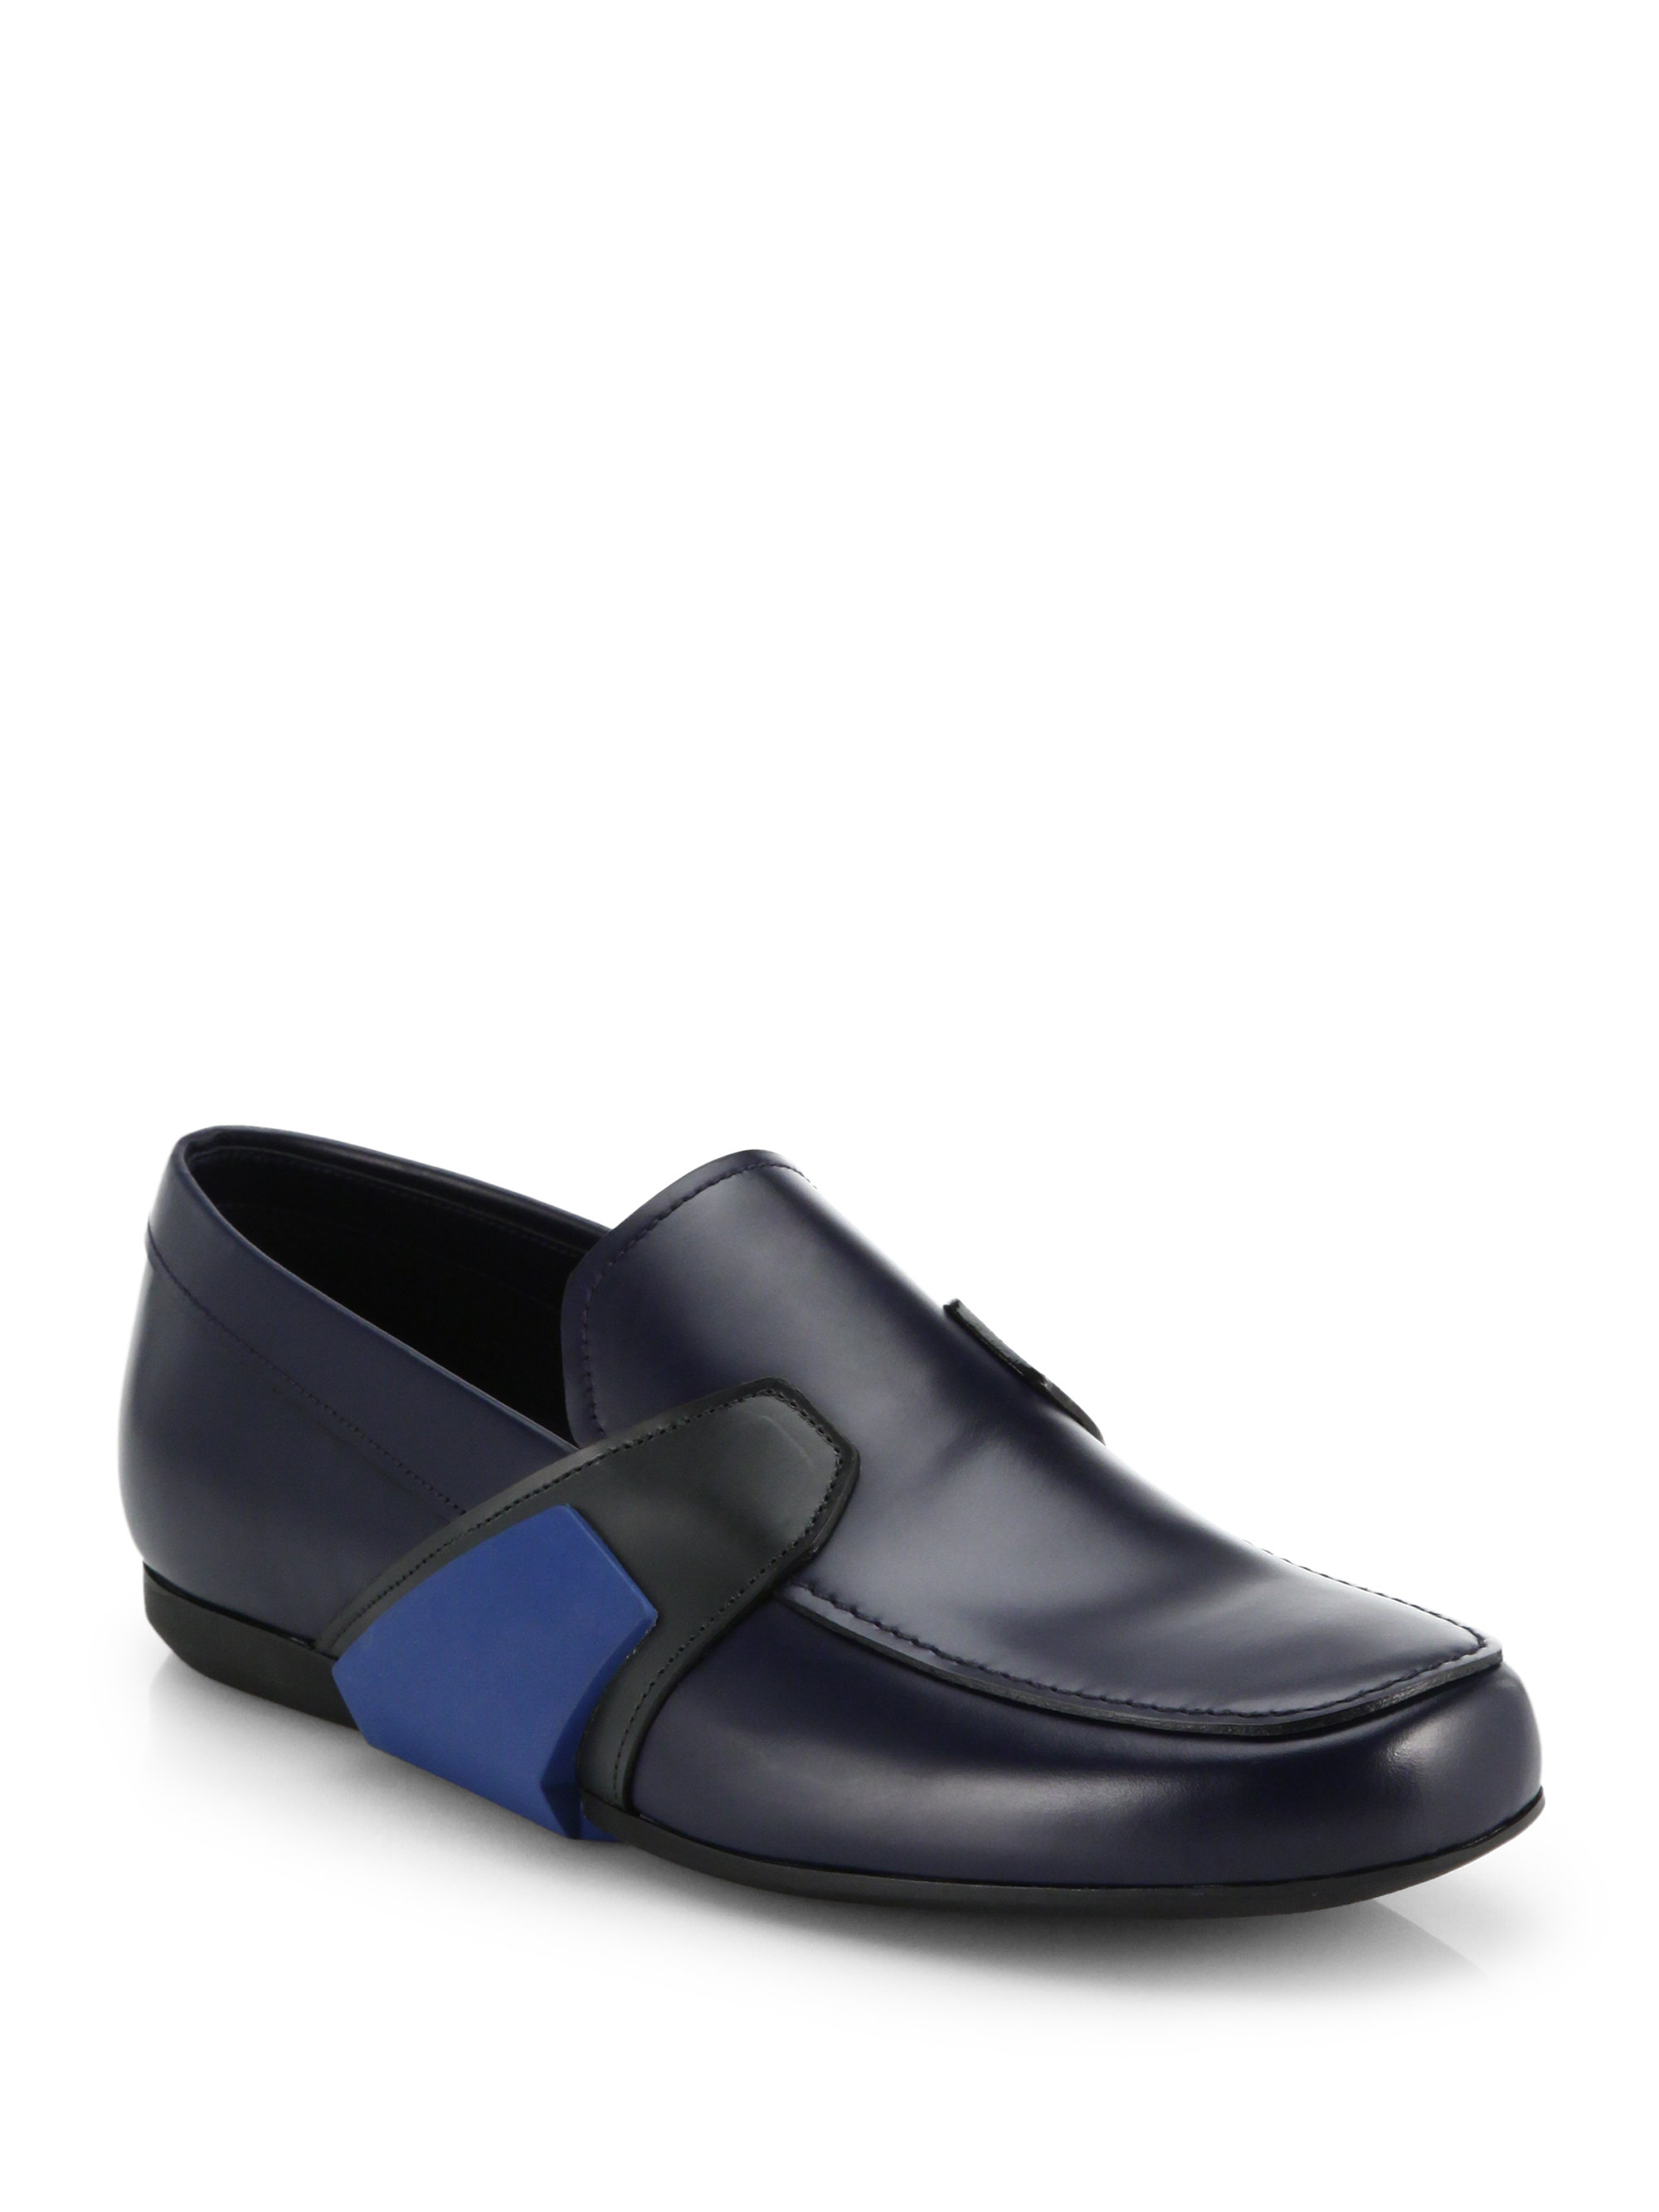 Lyst - Prada Leather Runway Loafers in Blue for Men